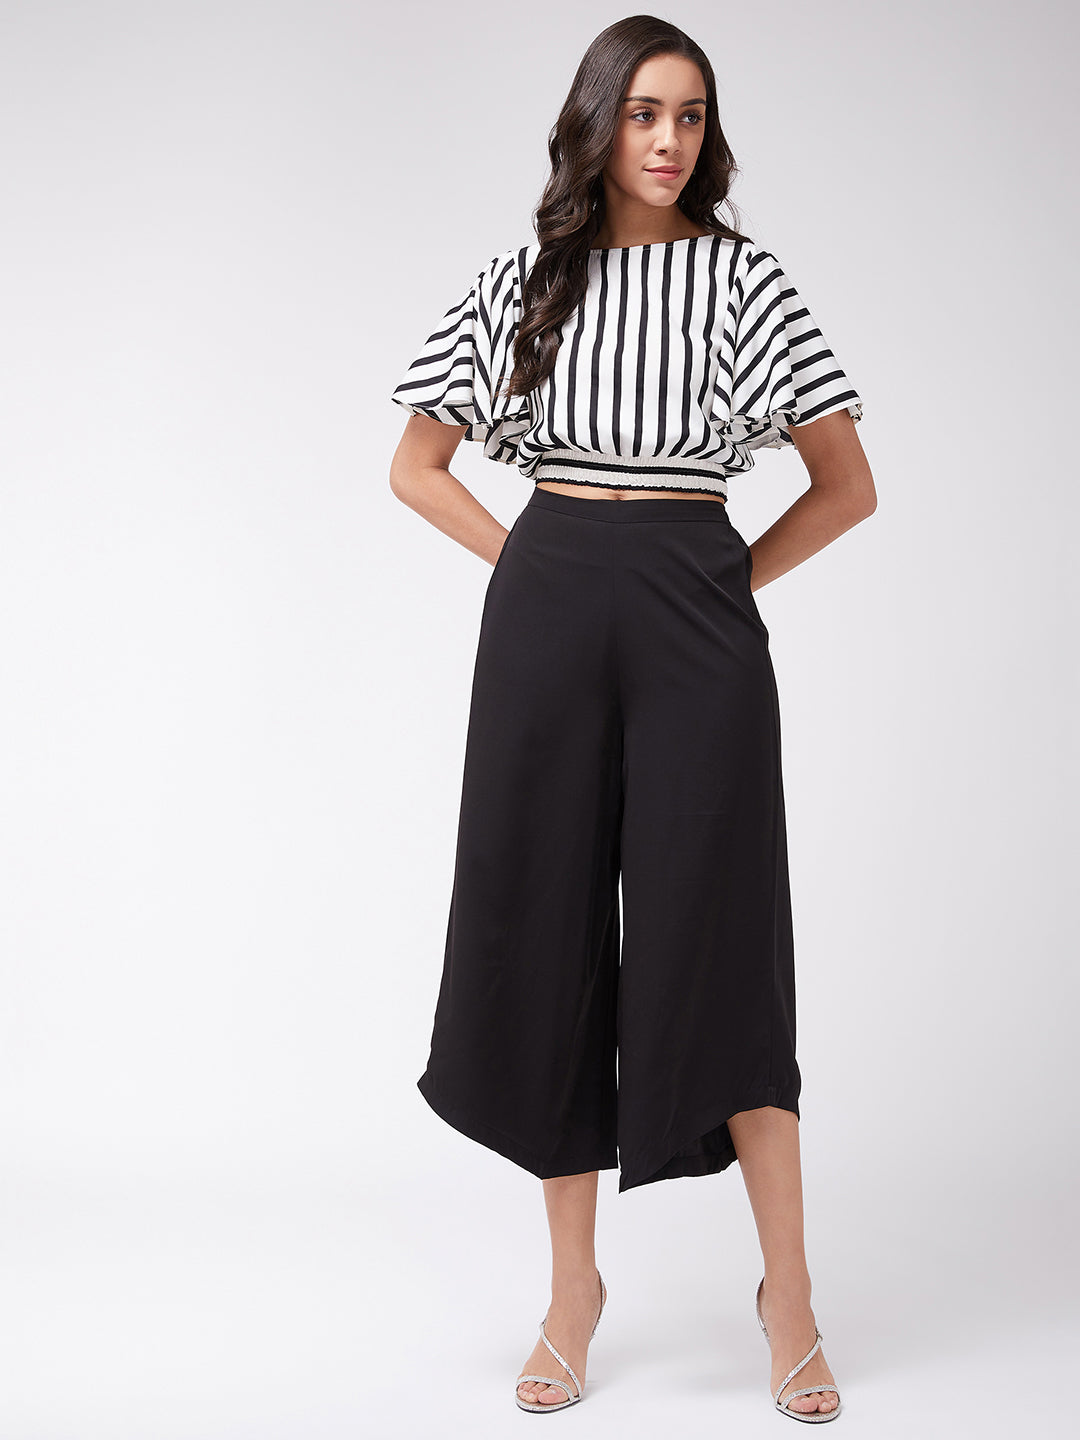 Monocromatic Stripes Crop Top With Solid Pants